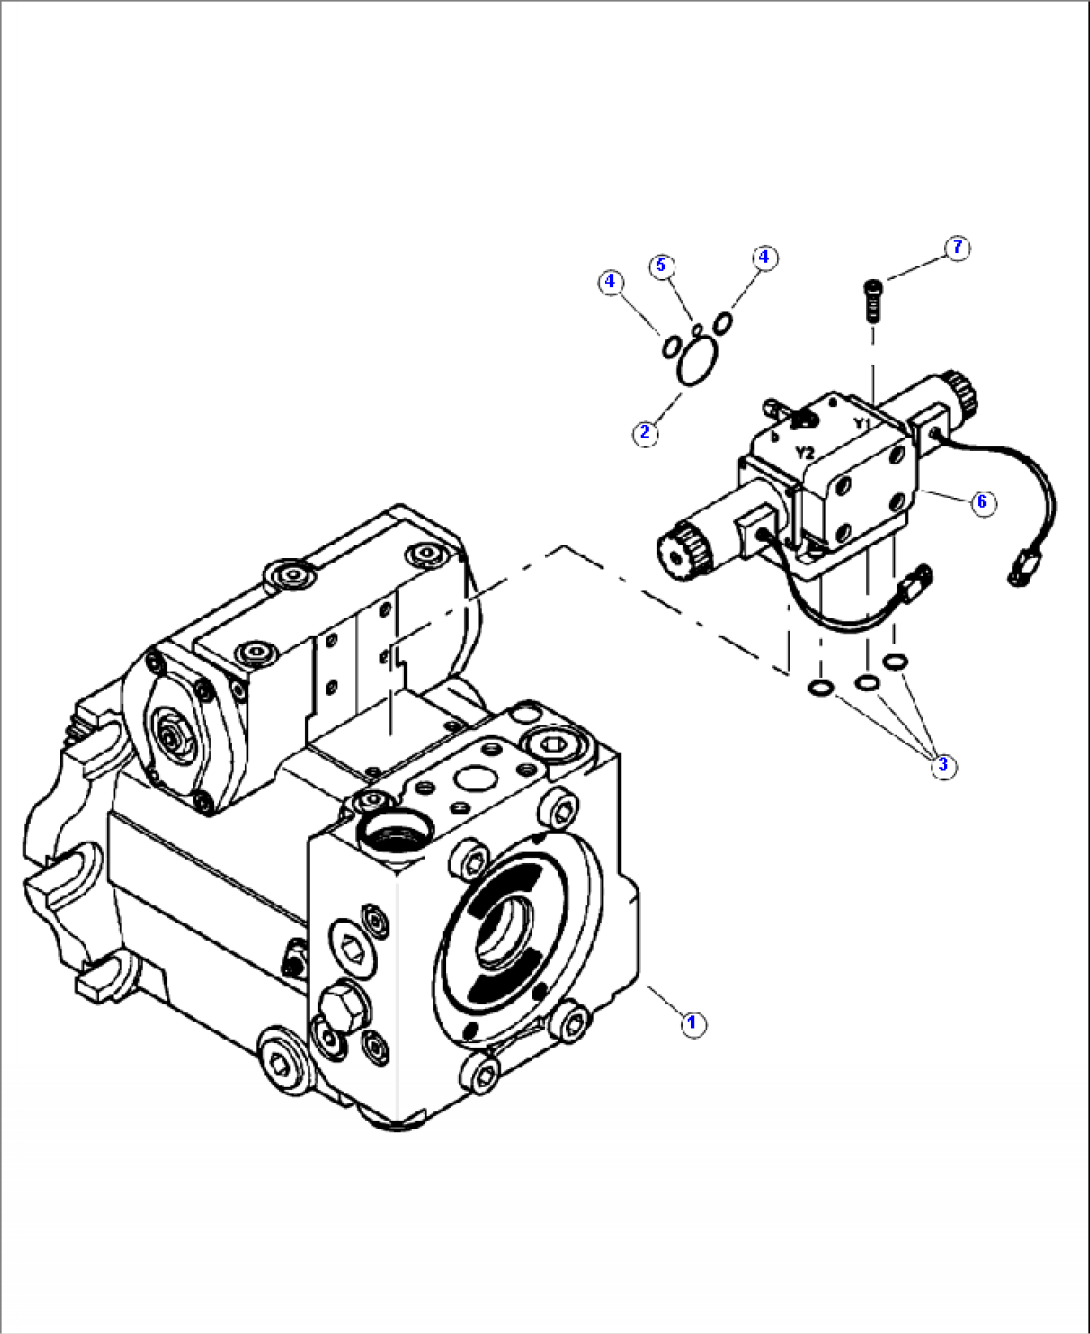 H0247-01A0 TRACK DRIVE PUMP STROKE CONTROL VALVE MOUNTING